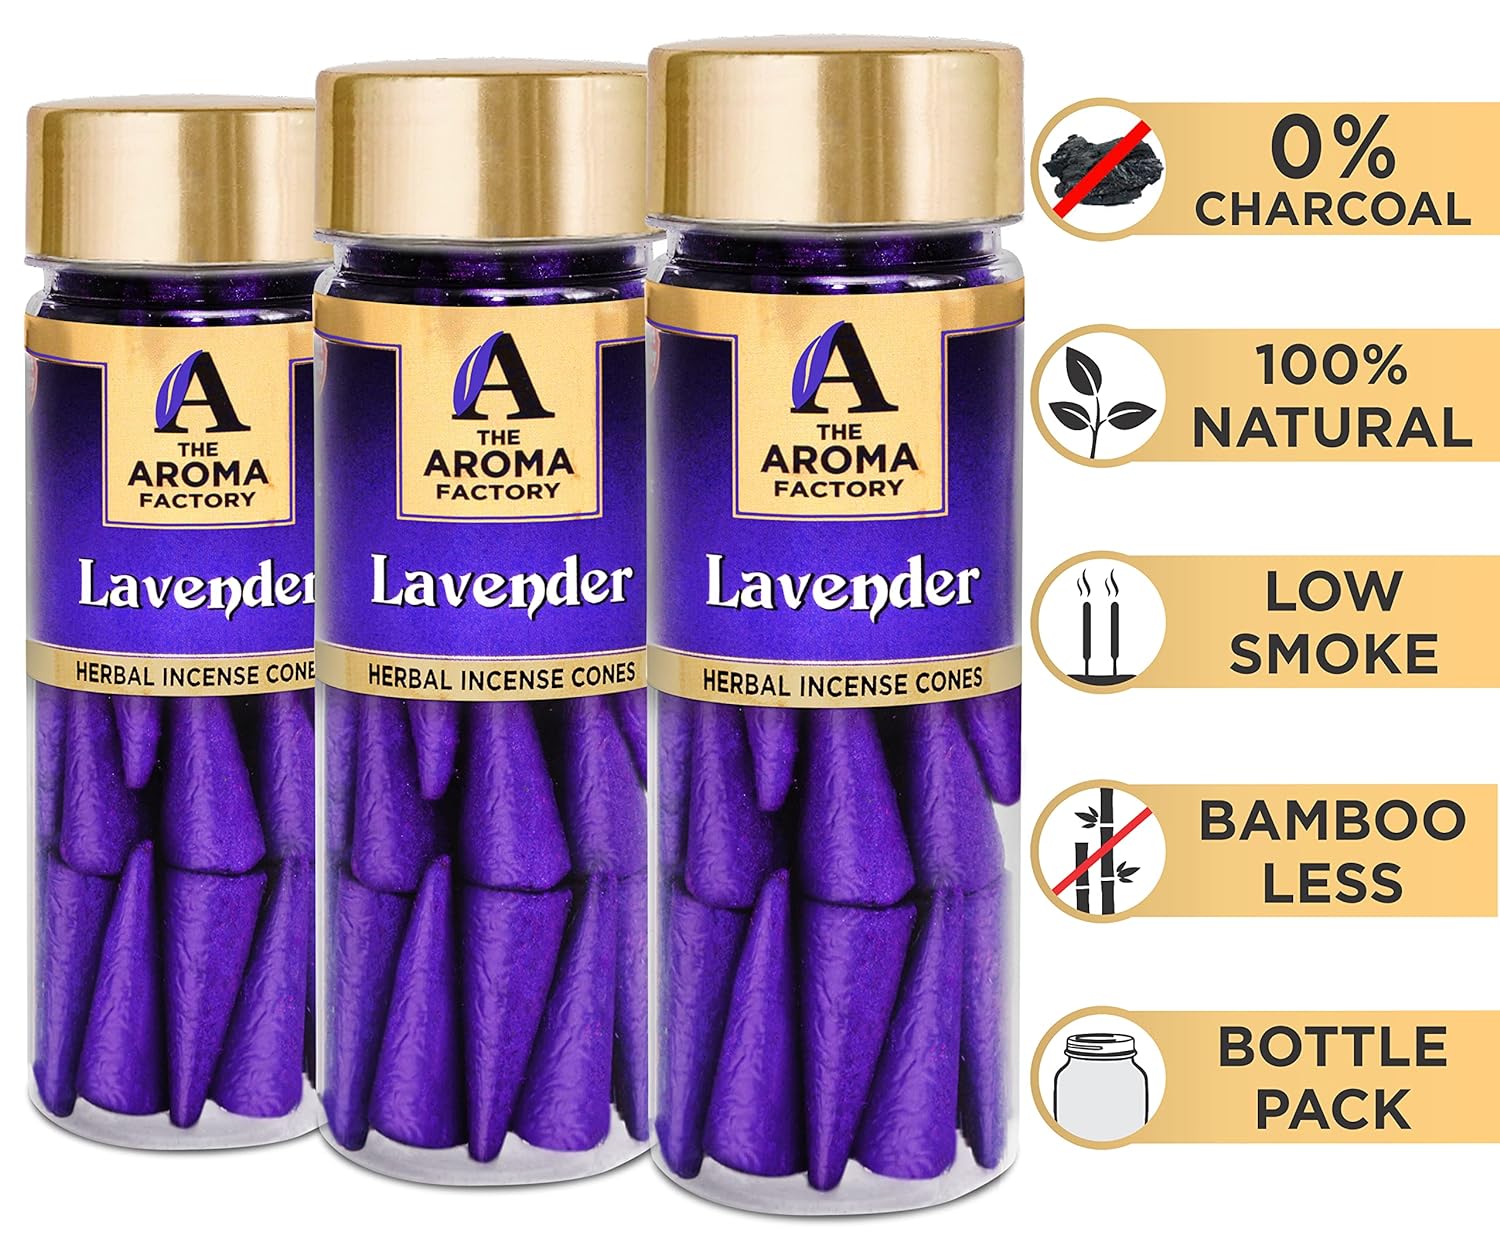 The Aroma Factory Incense Dhoop Cone, Lavender (100% Herbal & 0% Charcoal) 3 Bottles x 30 Cones